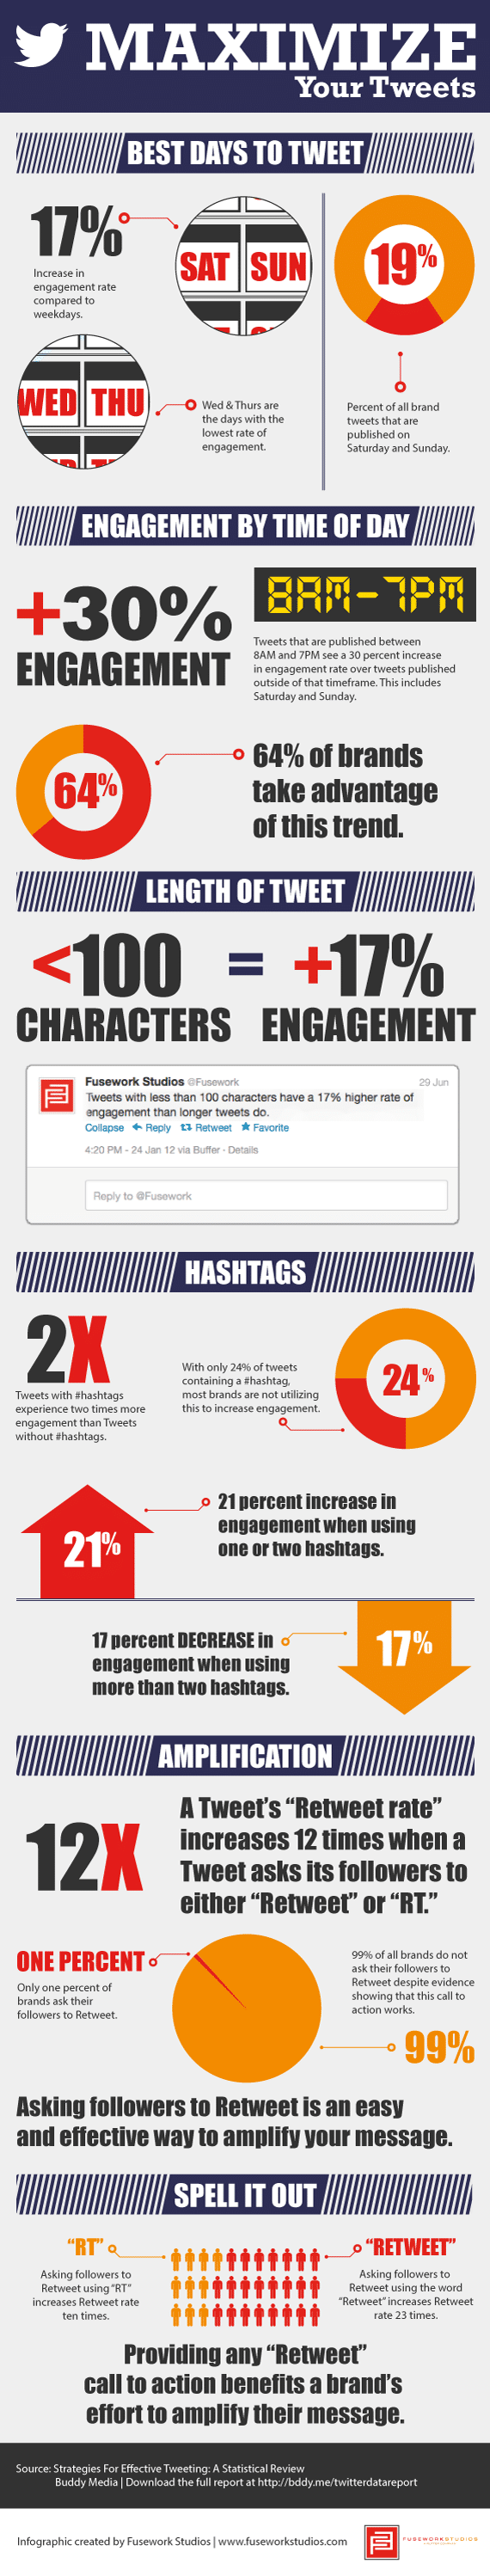 Fresh Data To Maximize Your Impact On Twitter [Infographic]